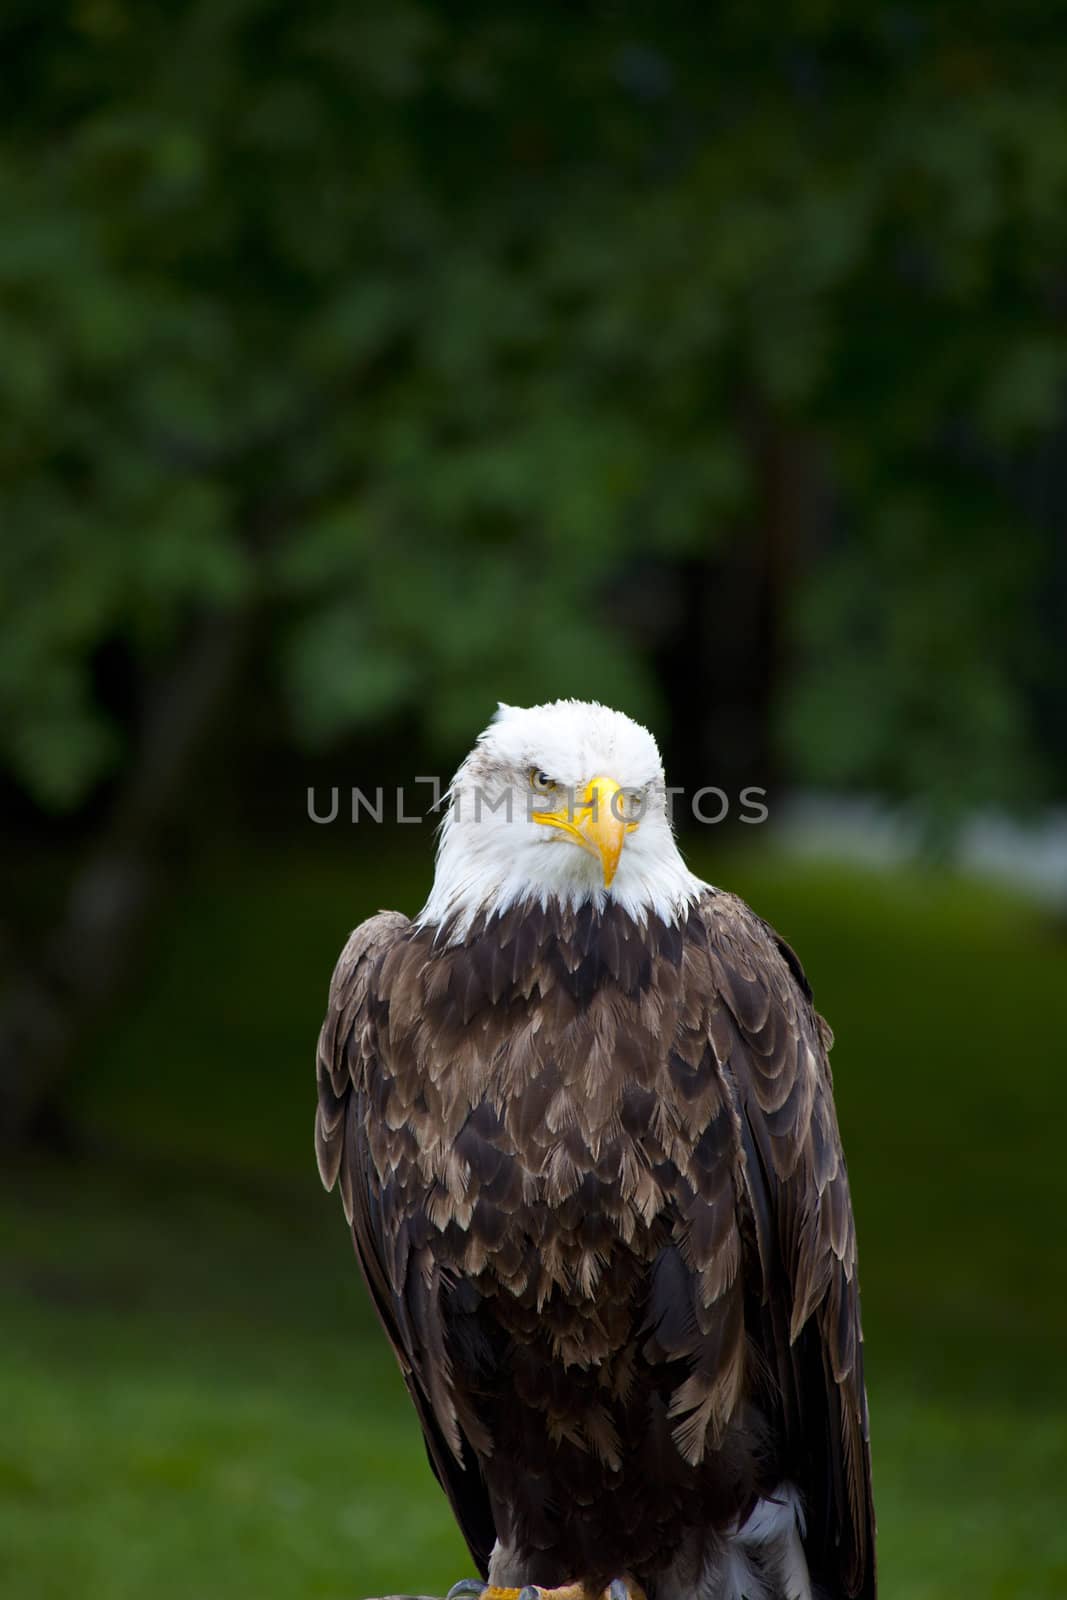 Sea eagle standing with green background